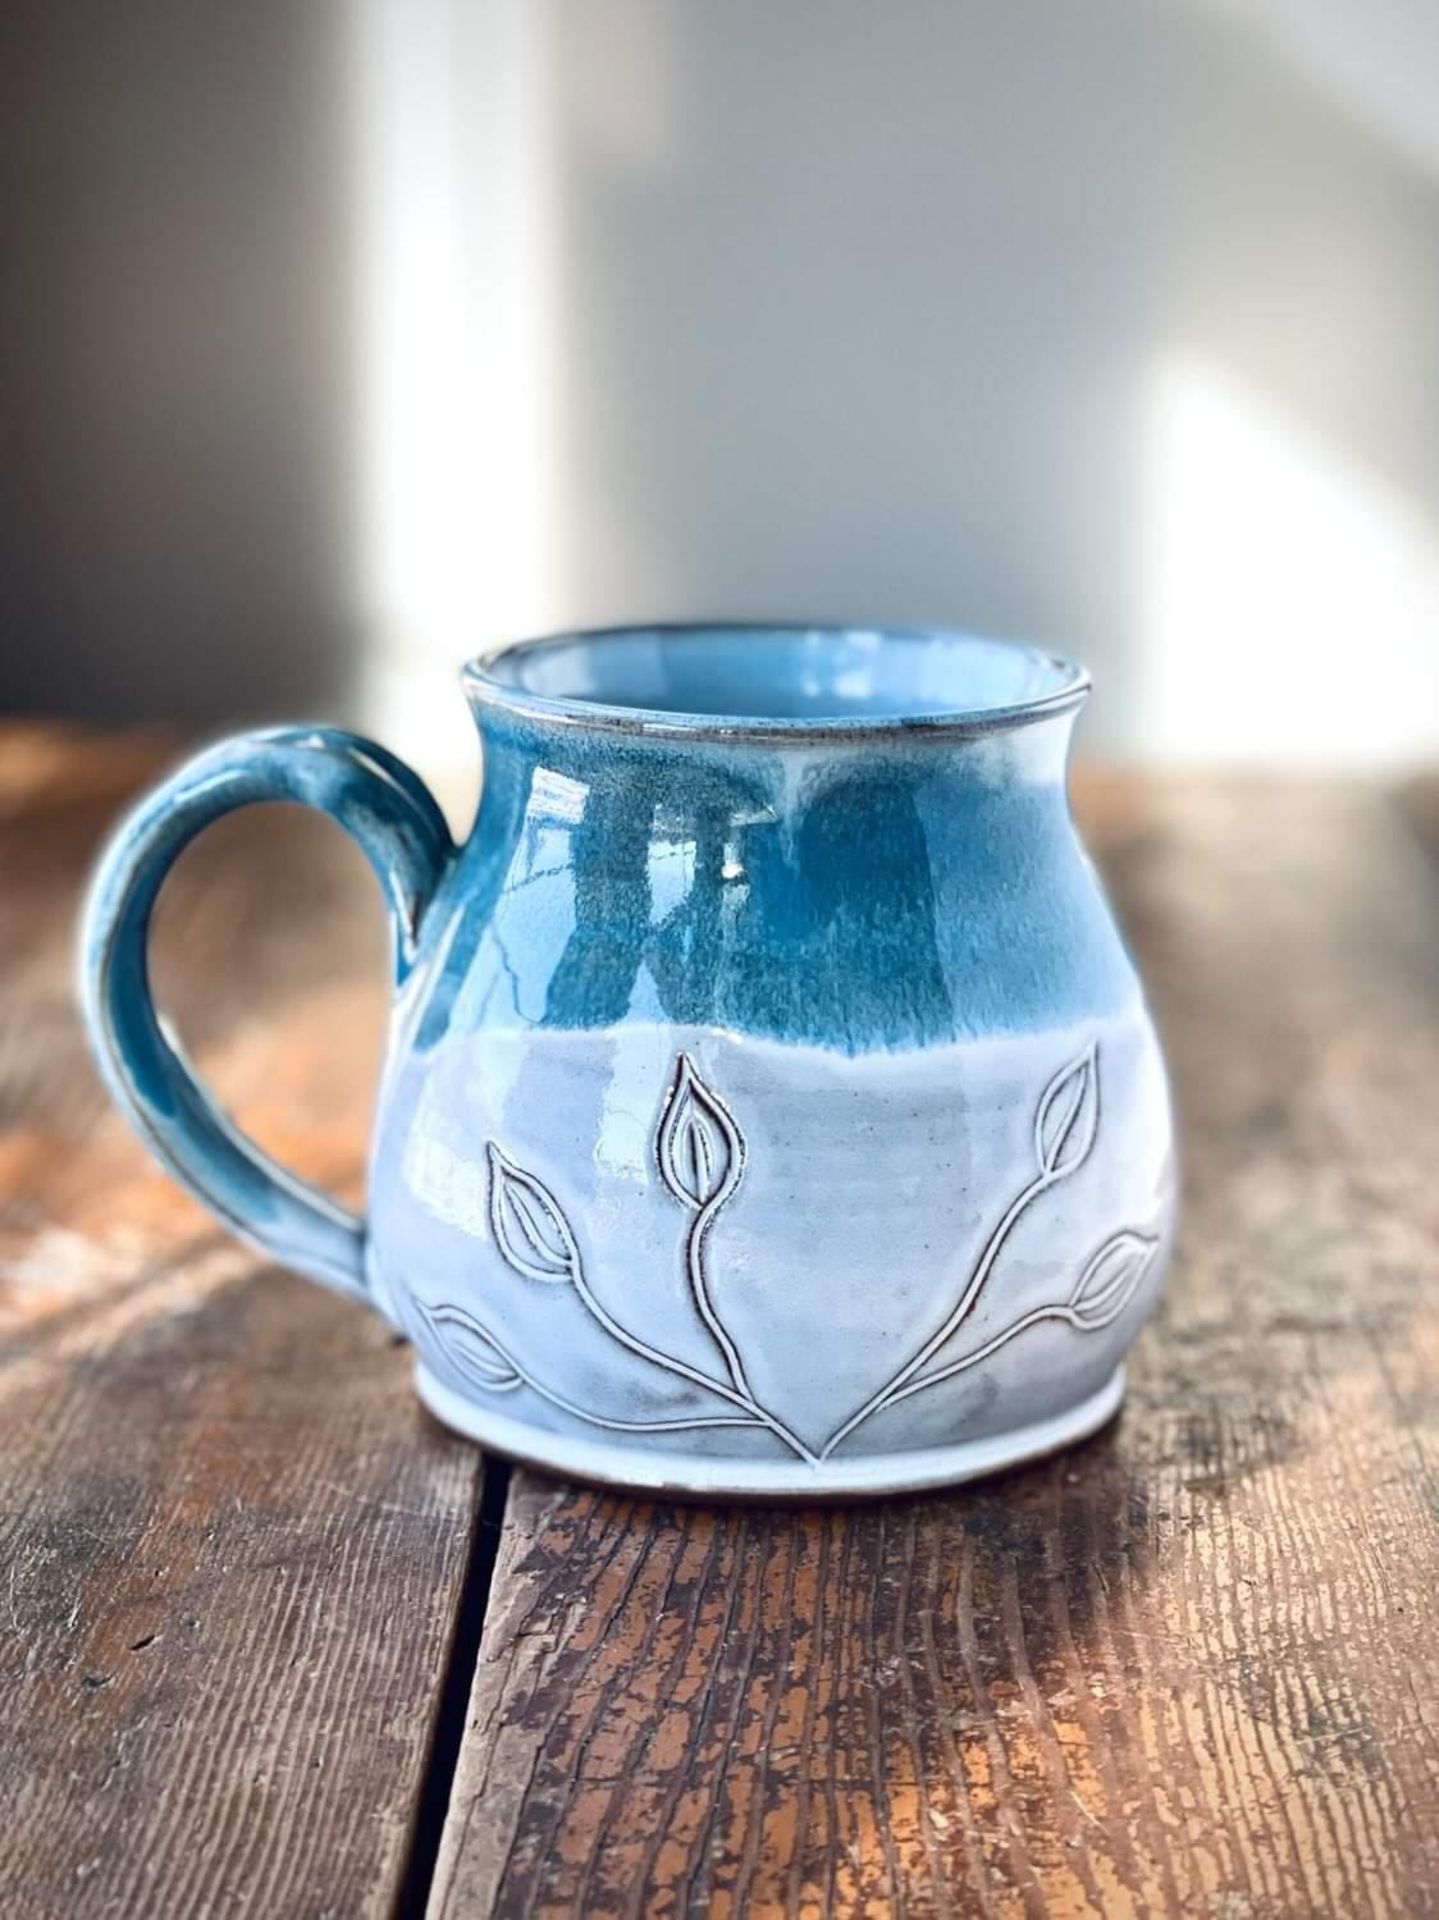 Custom Chickadee Ceramic Mug, Unique pottery Handmade in small batches Donated By Muddy Luck Pottery - Image 2 of 2